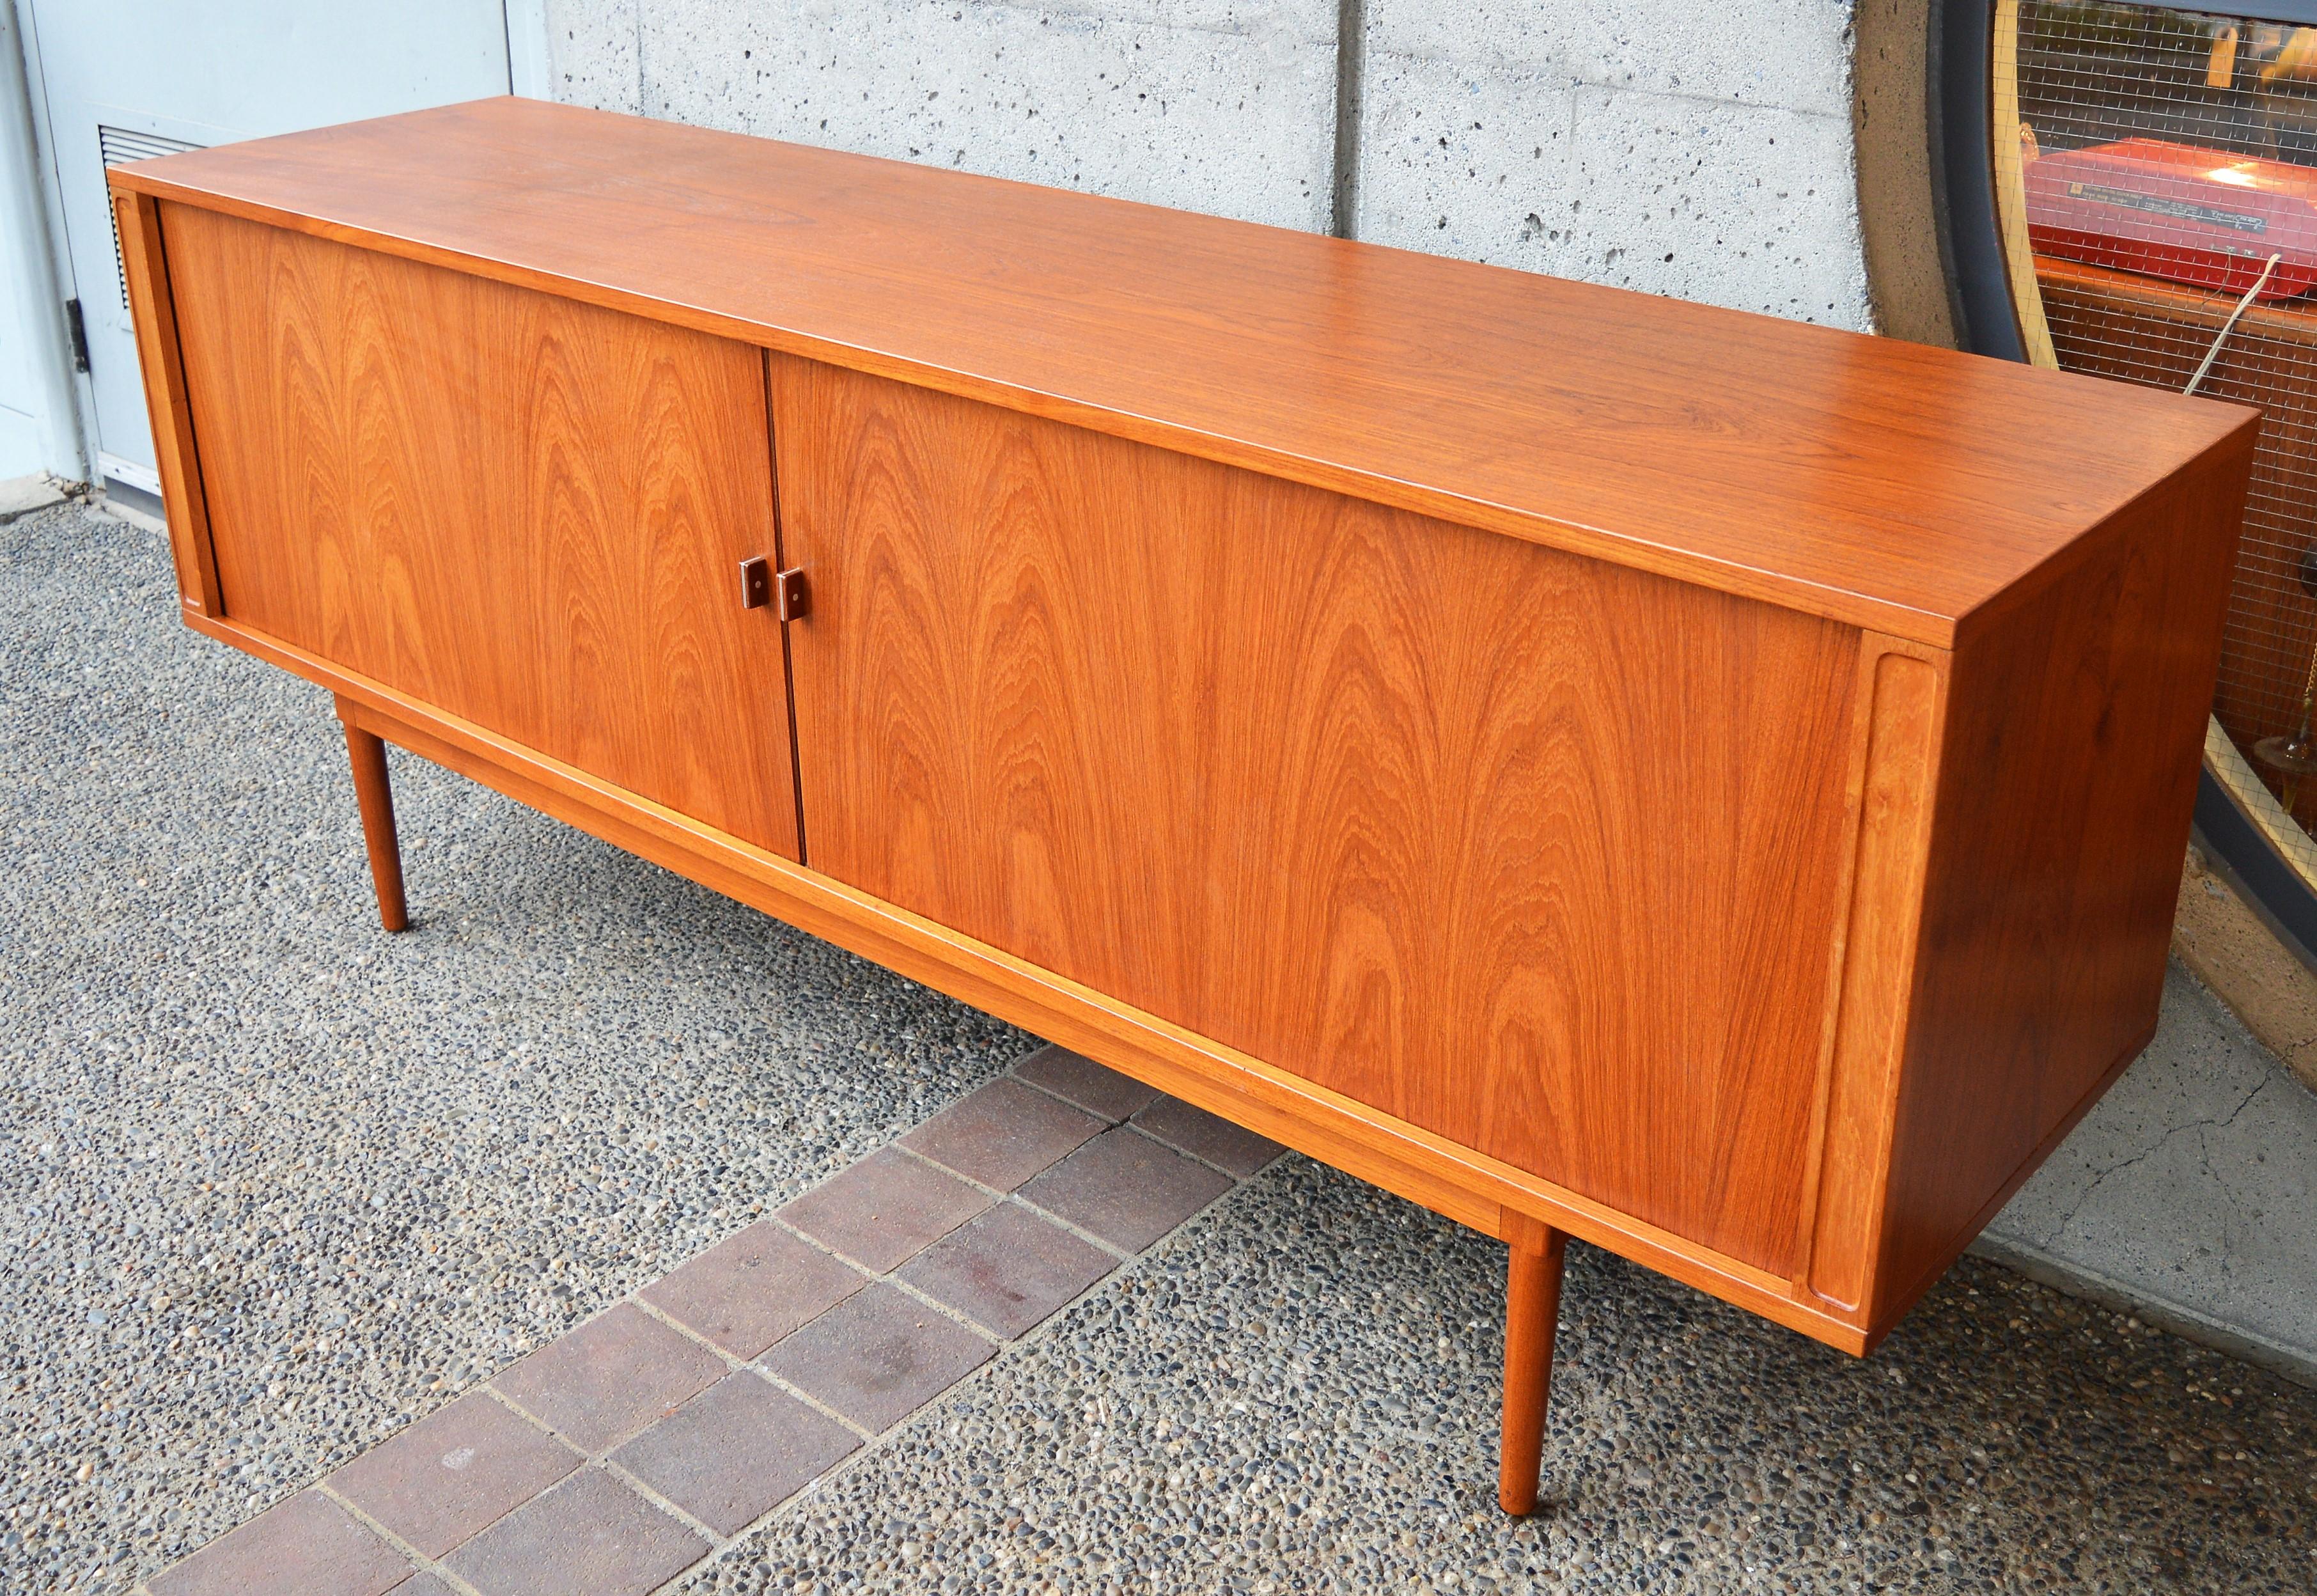 This top quality Danish Modern teak buffet was designed by Peter Lovig Nielsen in 1969 for Dansk and has tambour doors that fold and disappear inside the cabinet with teak and chrome door pulls. Note the gorgeous solid wood base and apron, the